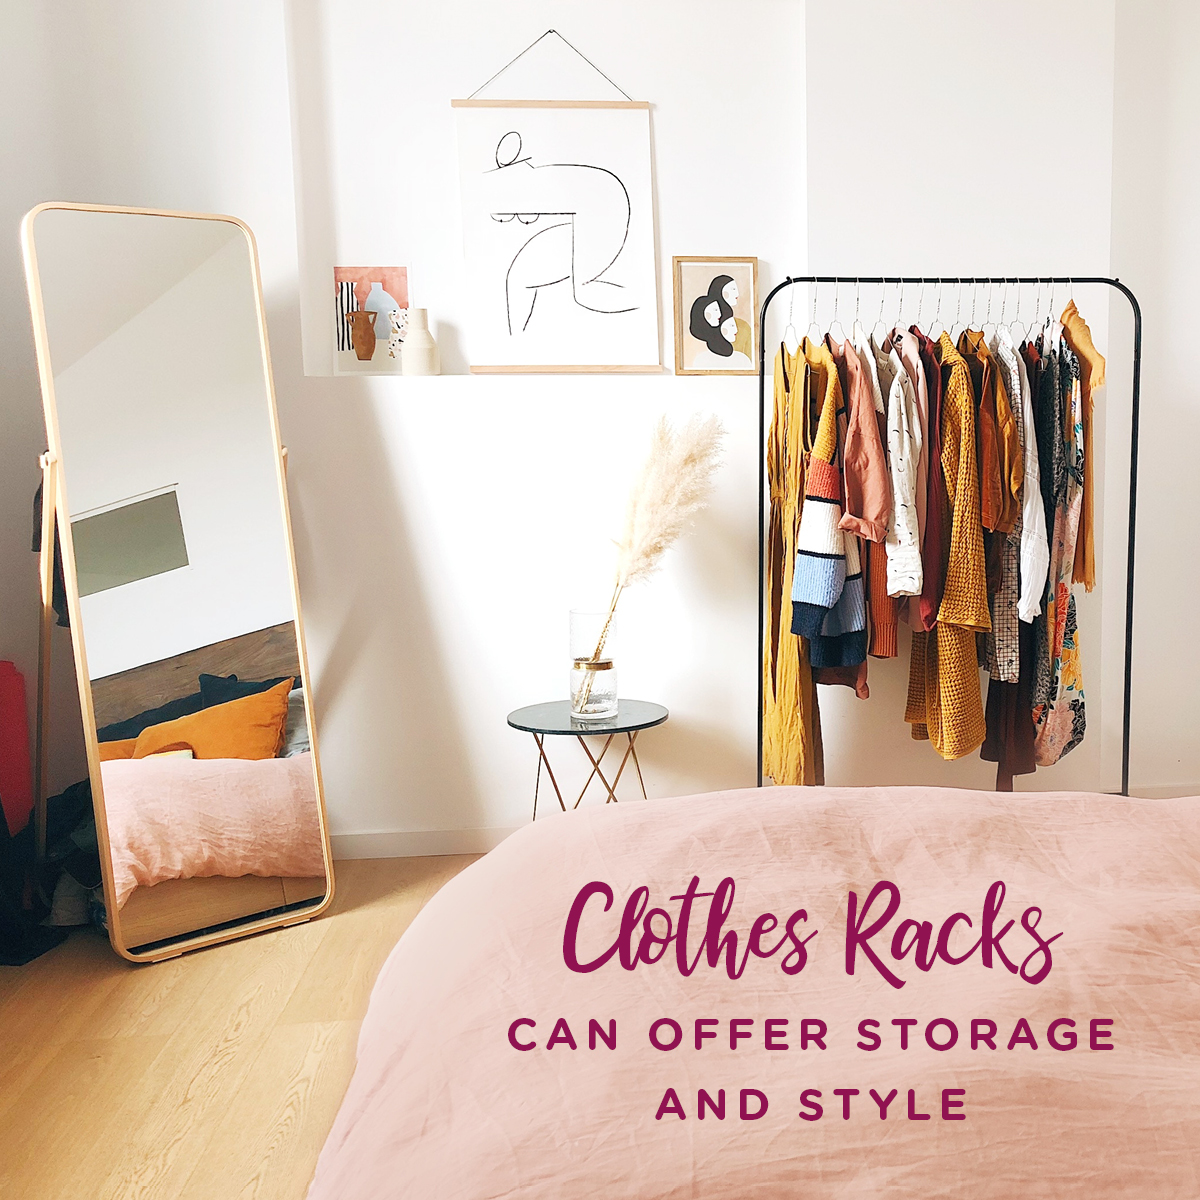 Clothes Racks Offer Storage & Style